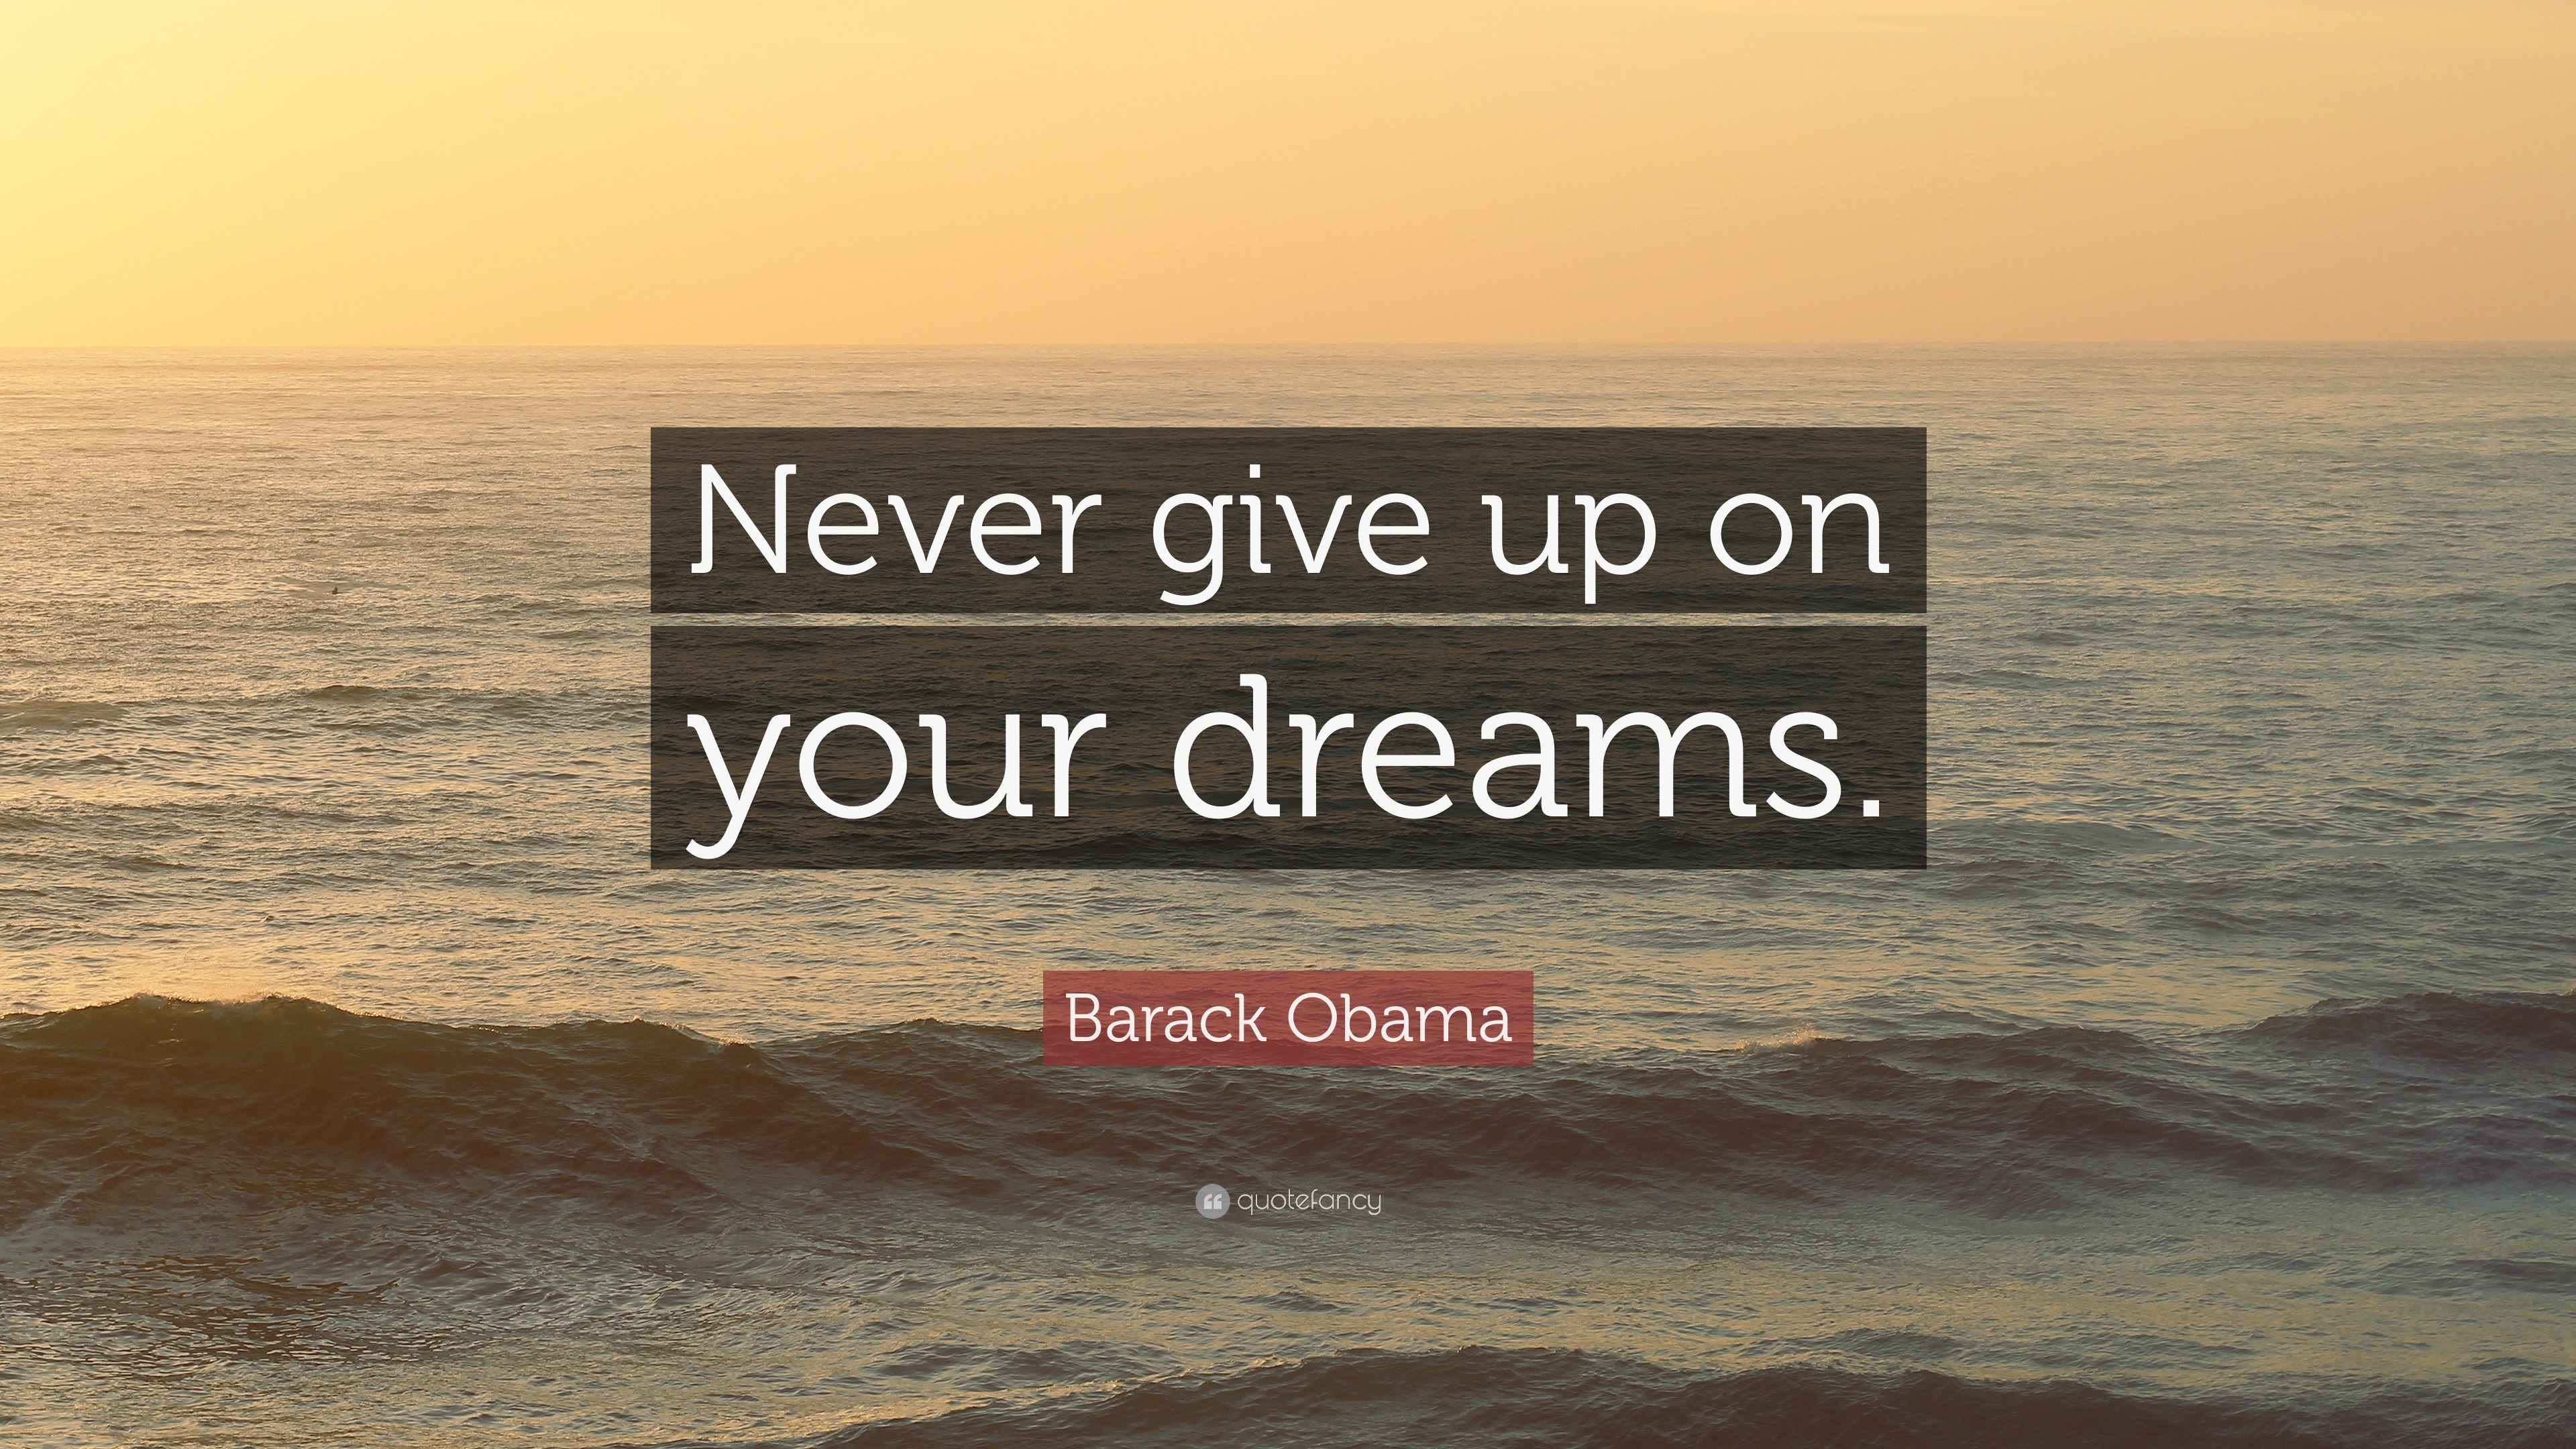 Barack Obama Quote: “Never give up on your dreams.”